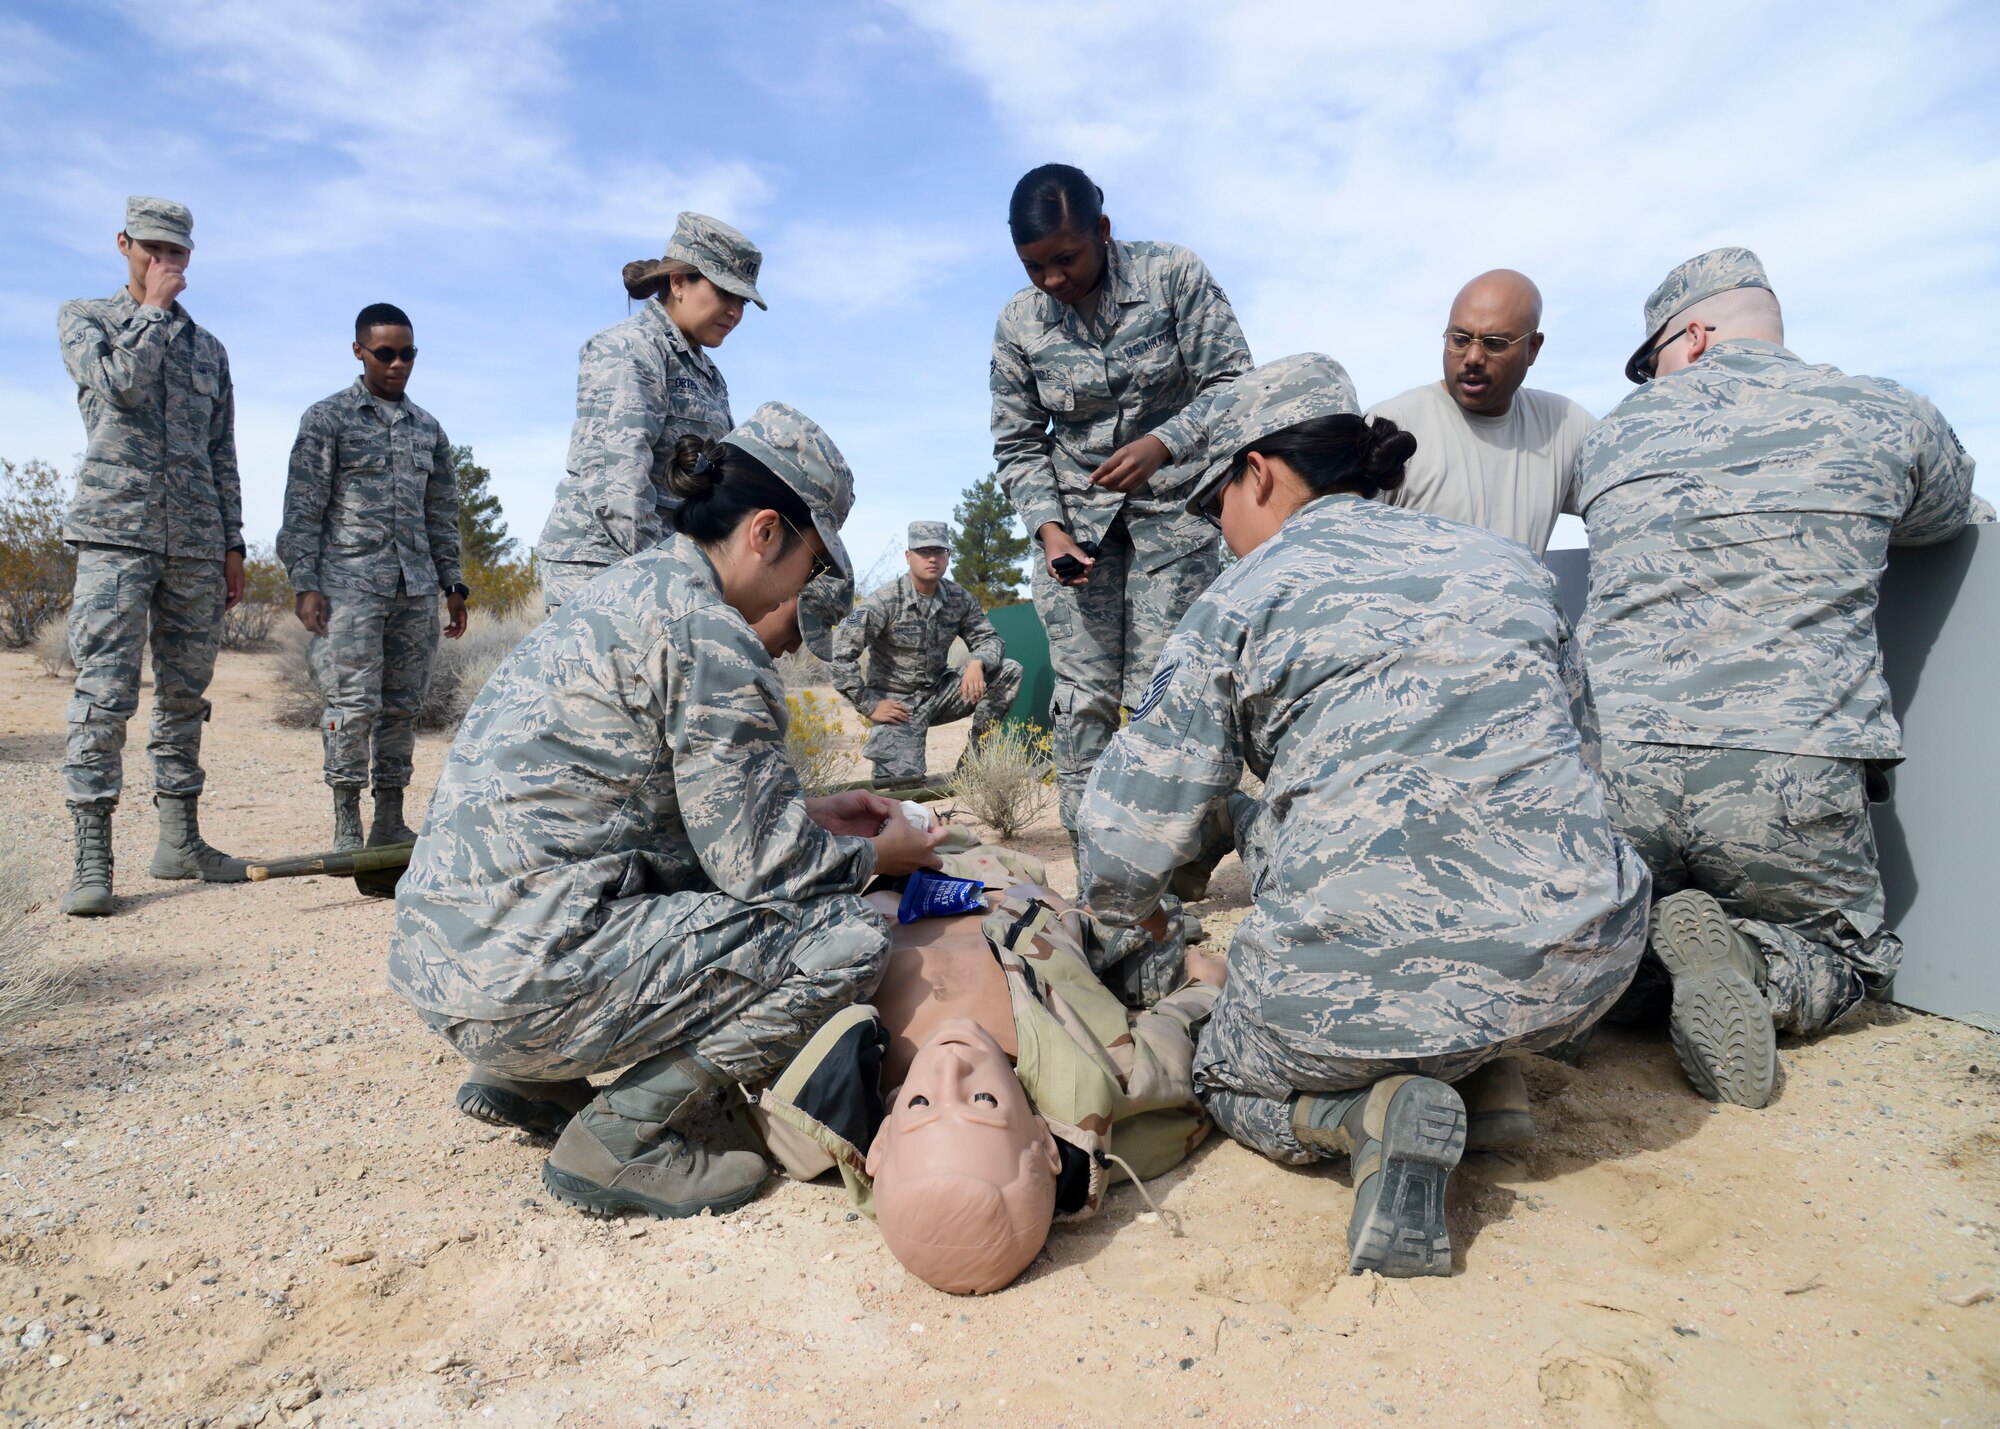 Airmen from the 412th Medical Group provides care under fire for a “victim” during a training exercise at Edwards Air Force Base, California, Nov. 1. The training ensures that Edwards medics are able to provide care in austere conditions. (U.S. Air Force photo by Giancarlo Casem)